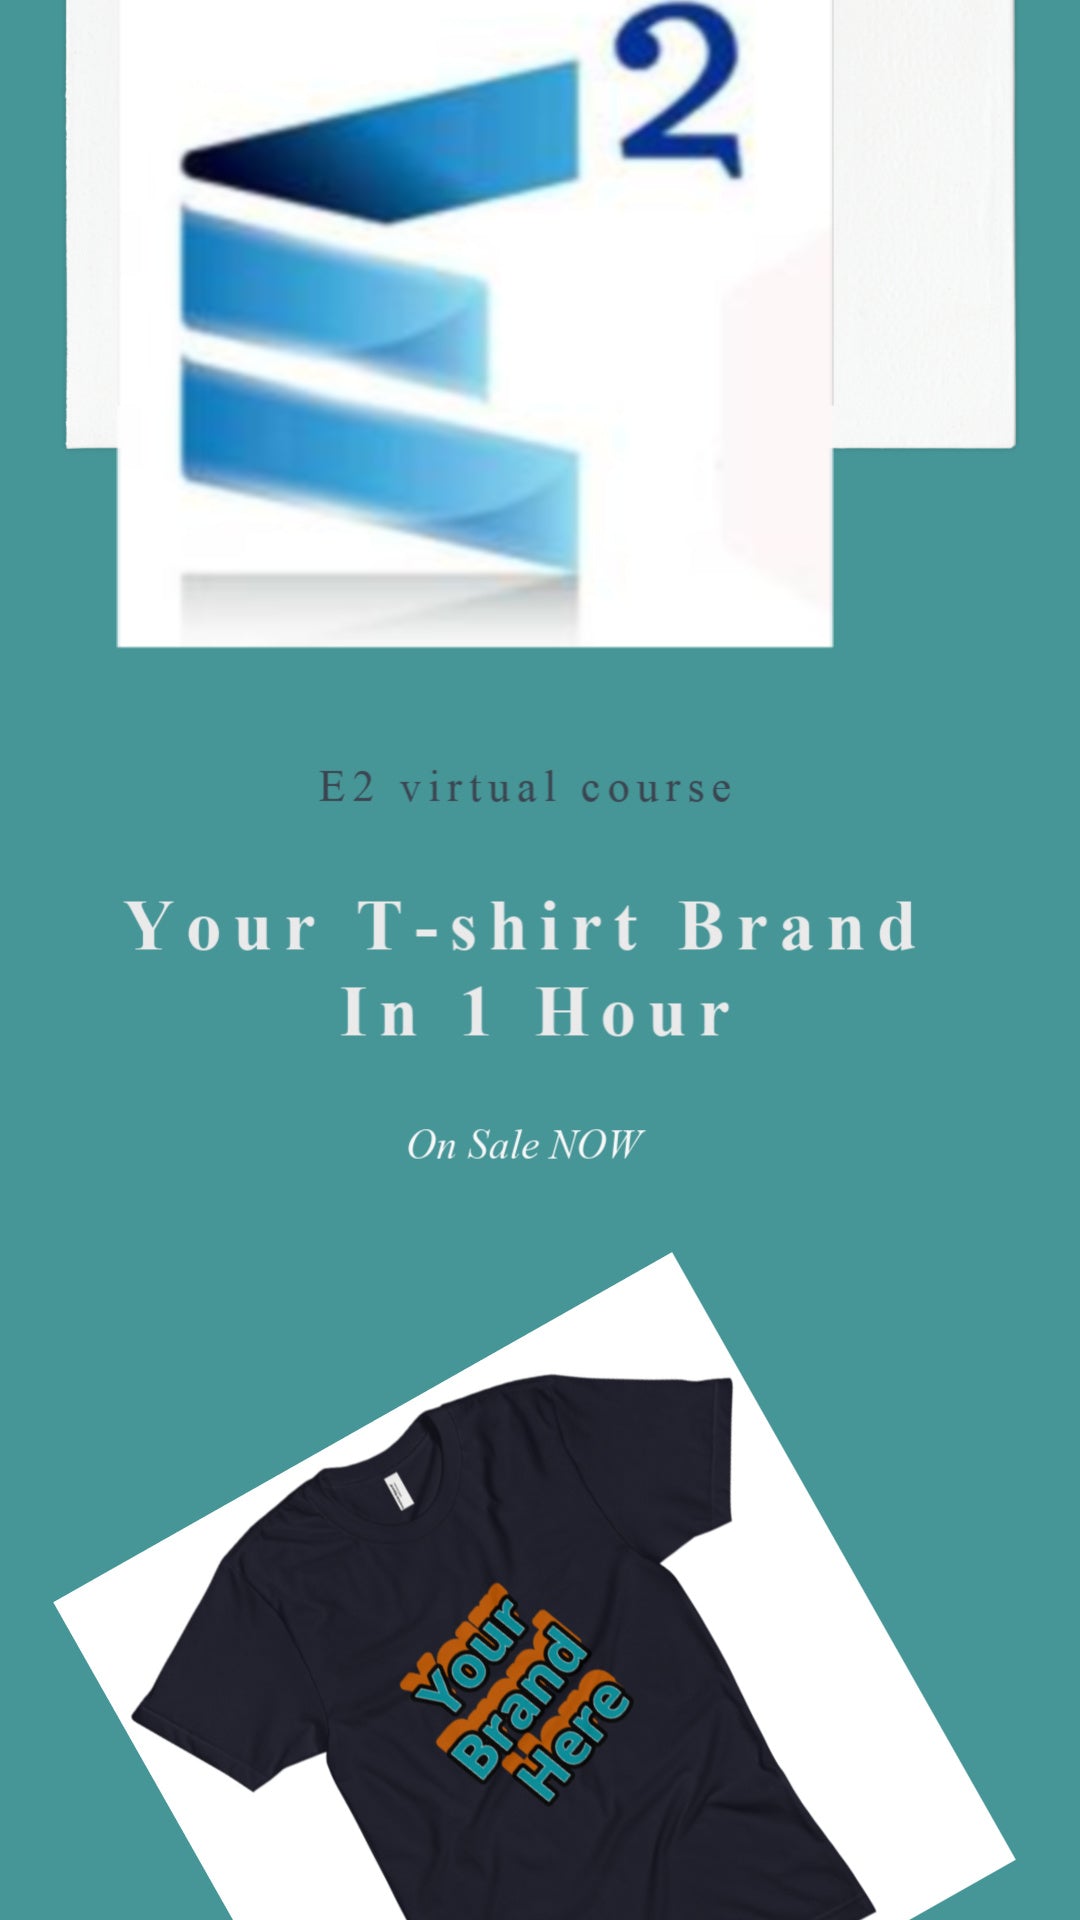 Your T-shirt Brand In 1 Hour LIVE